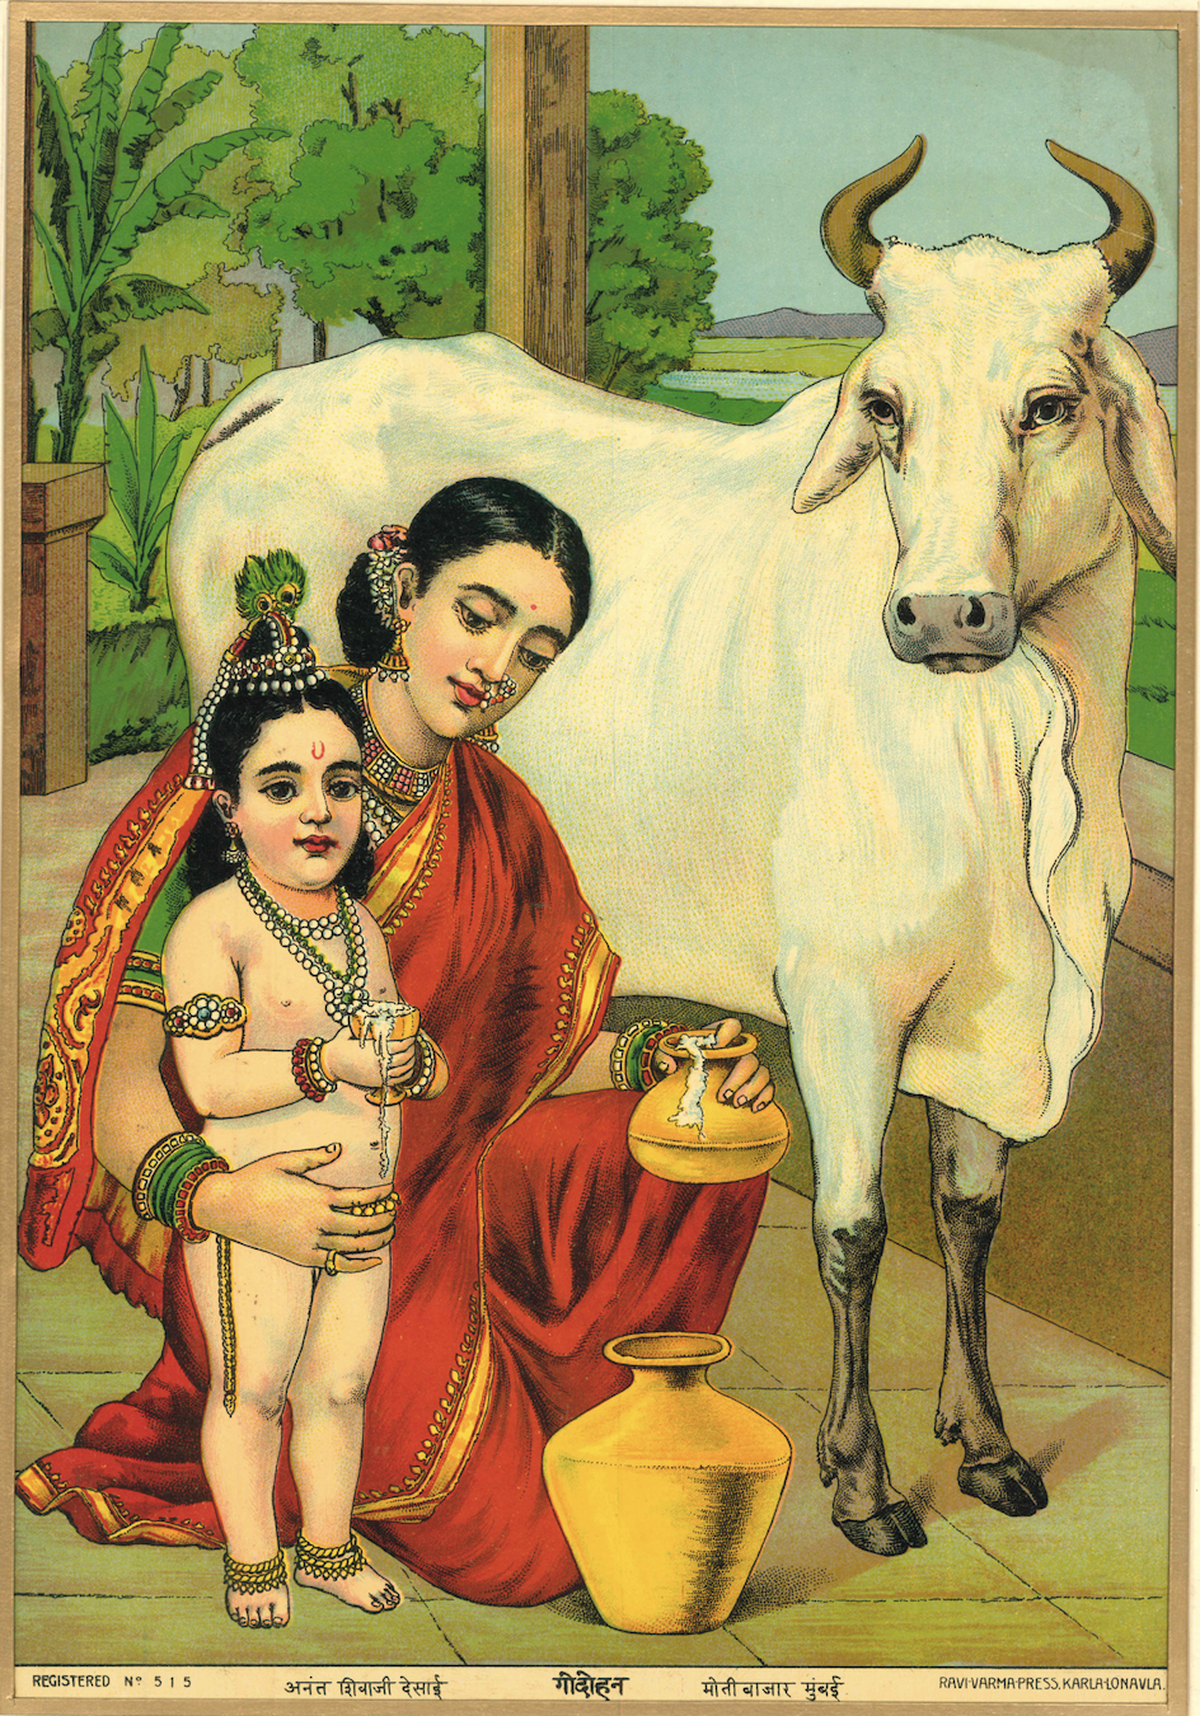 The chromolithographs were printed at the Ravi Varma Fine Arts Lithographic Press.